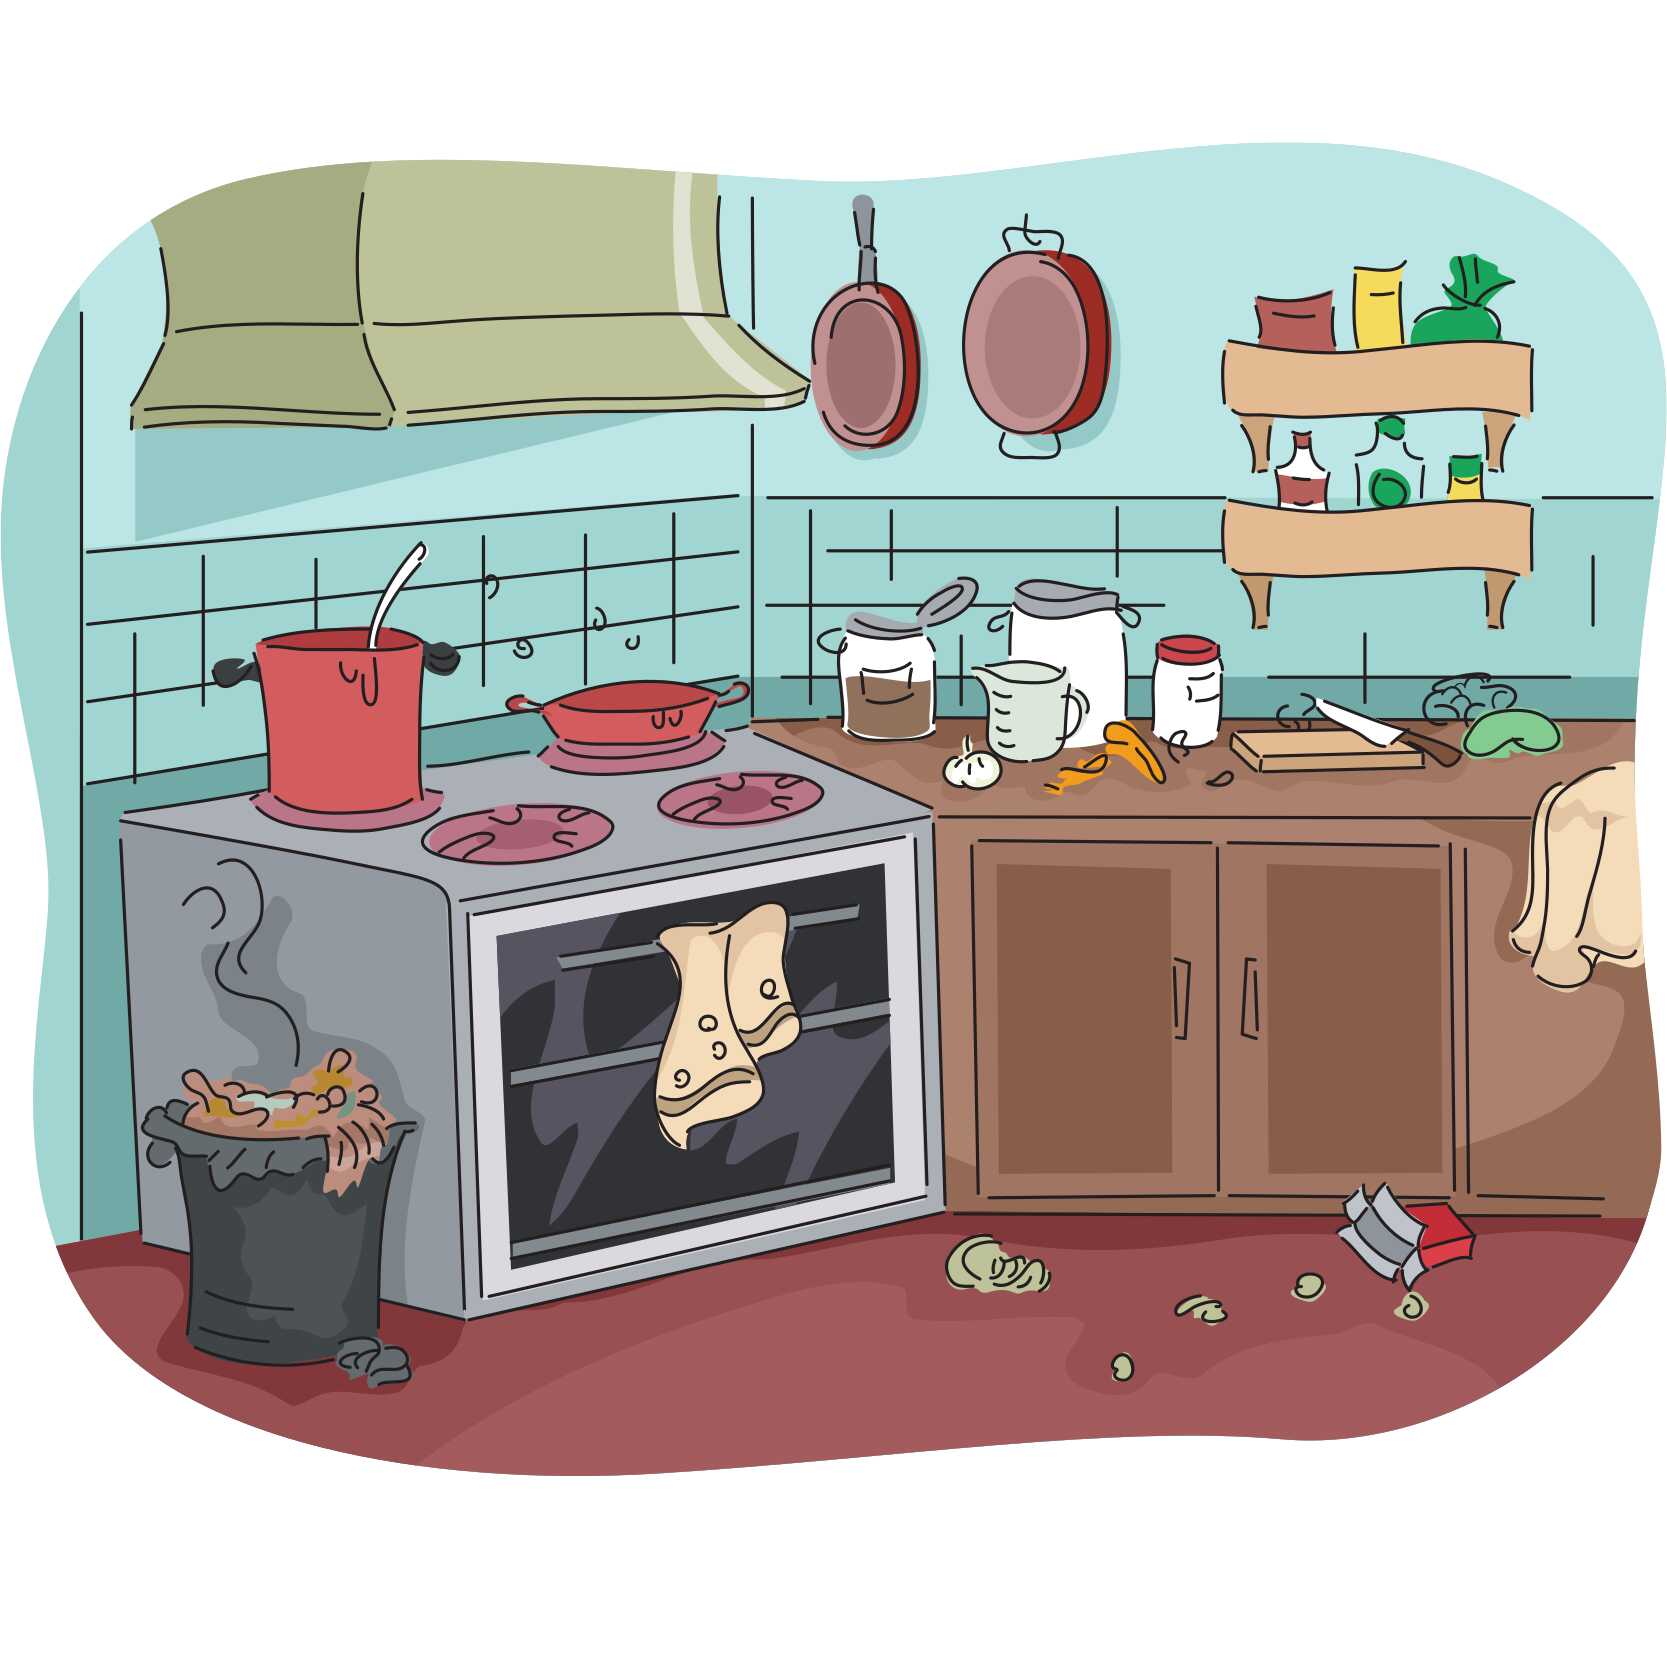 English vocabulary with pictures - Parts of a house - Kitchen